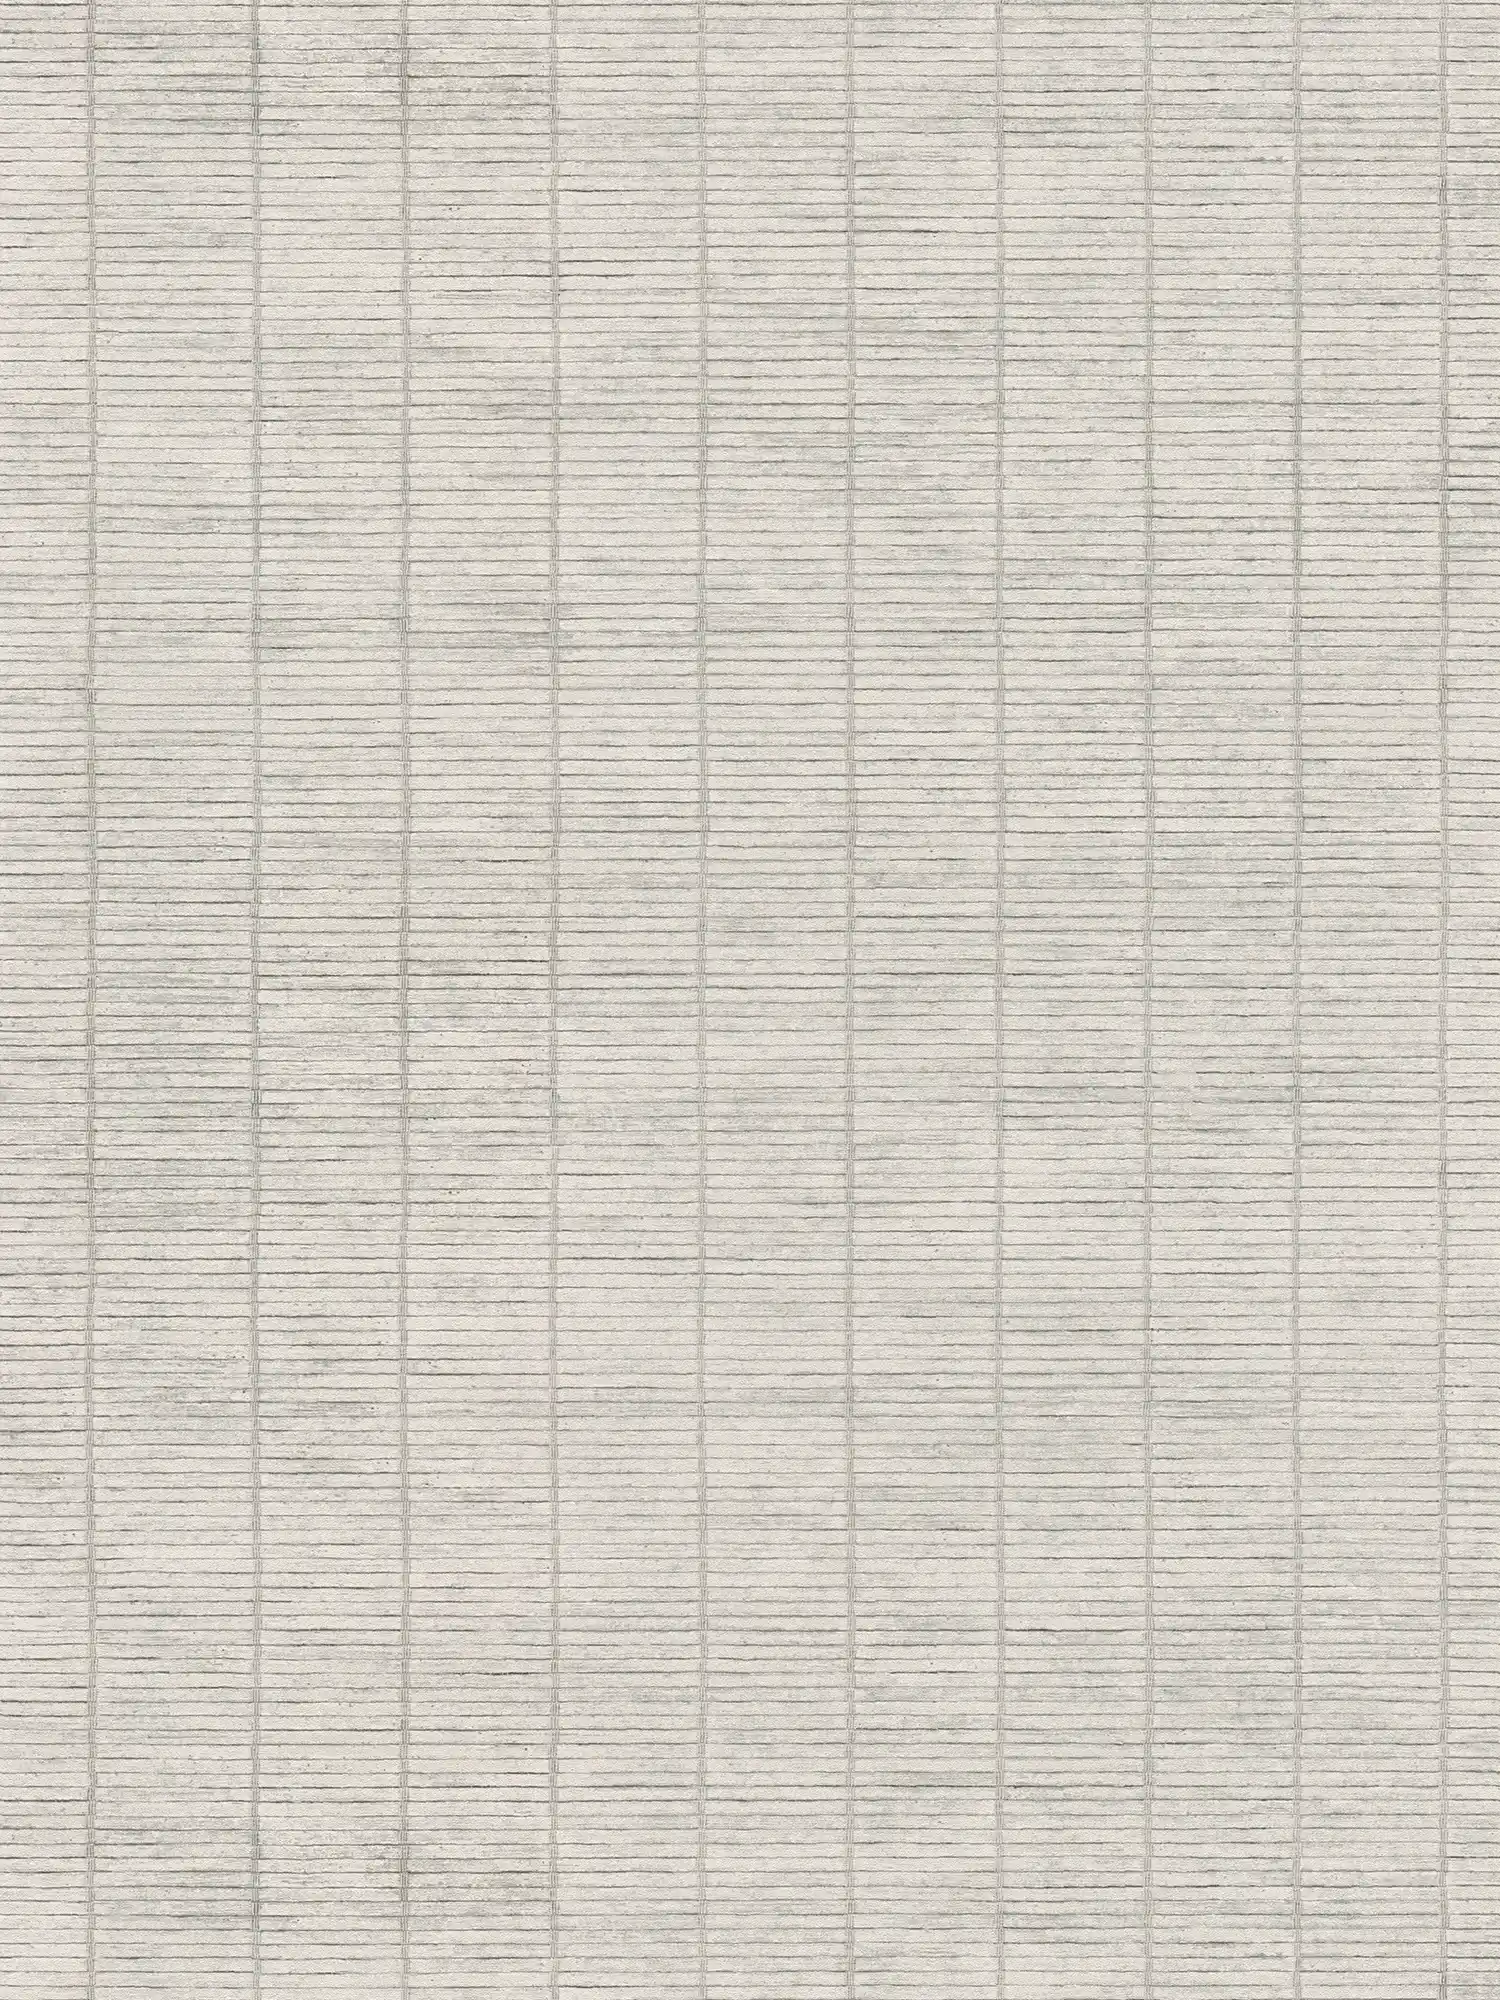         Non-woven wallpaper with bamboo partition look in Japandi style - grey
    